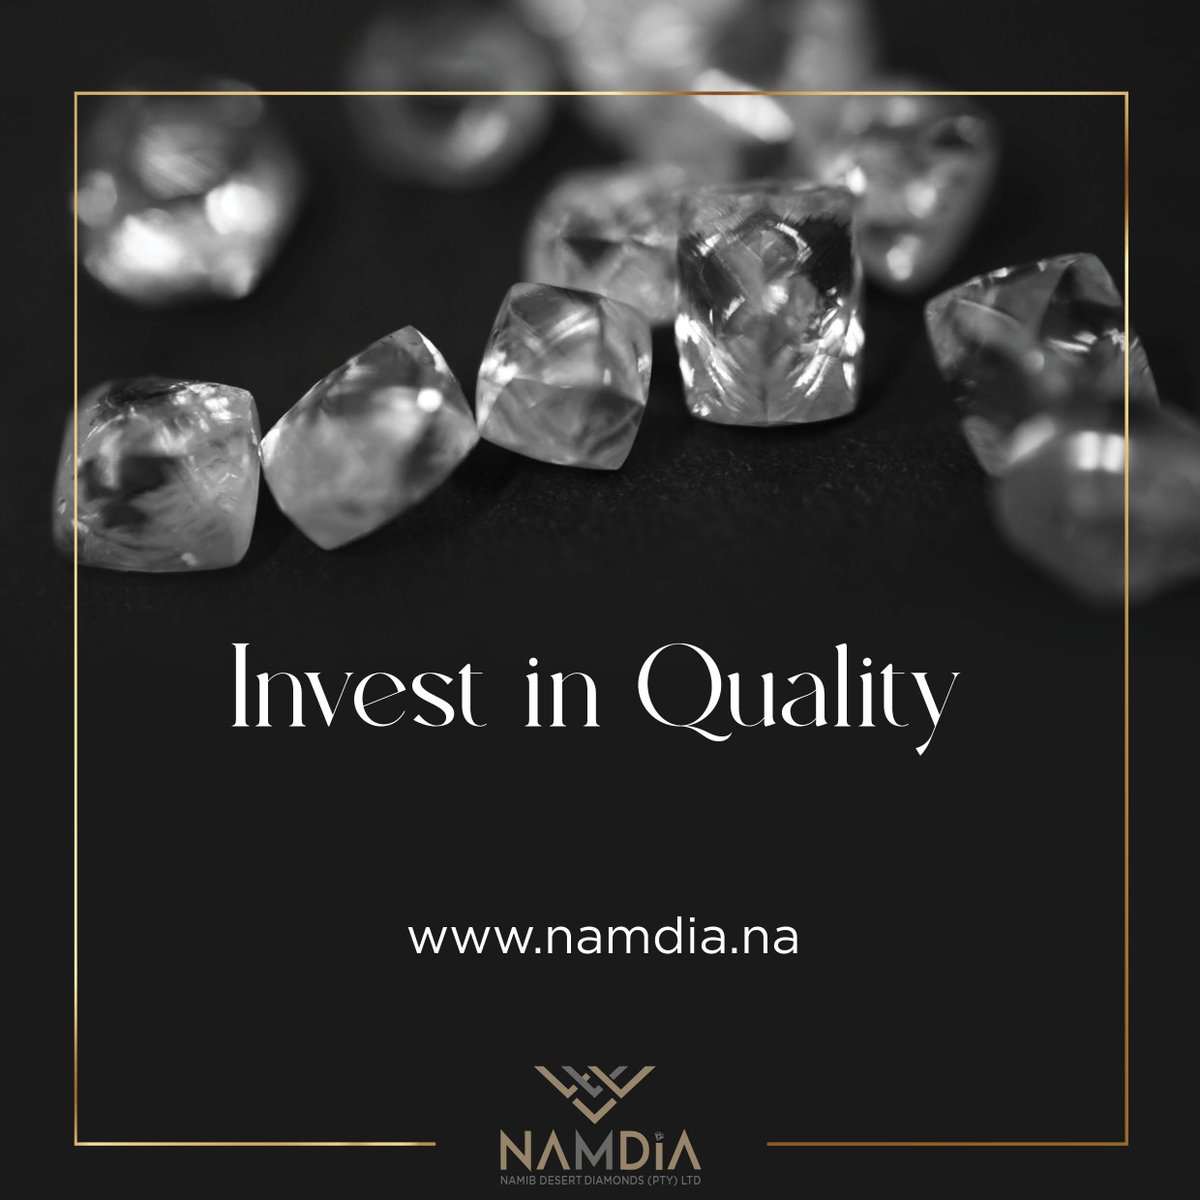 'Invest in Quality' #Namibia #desertdiamonds #excellence #sustainable #quality #future namdia.com @NAMDIANAM